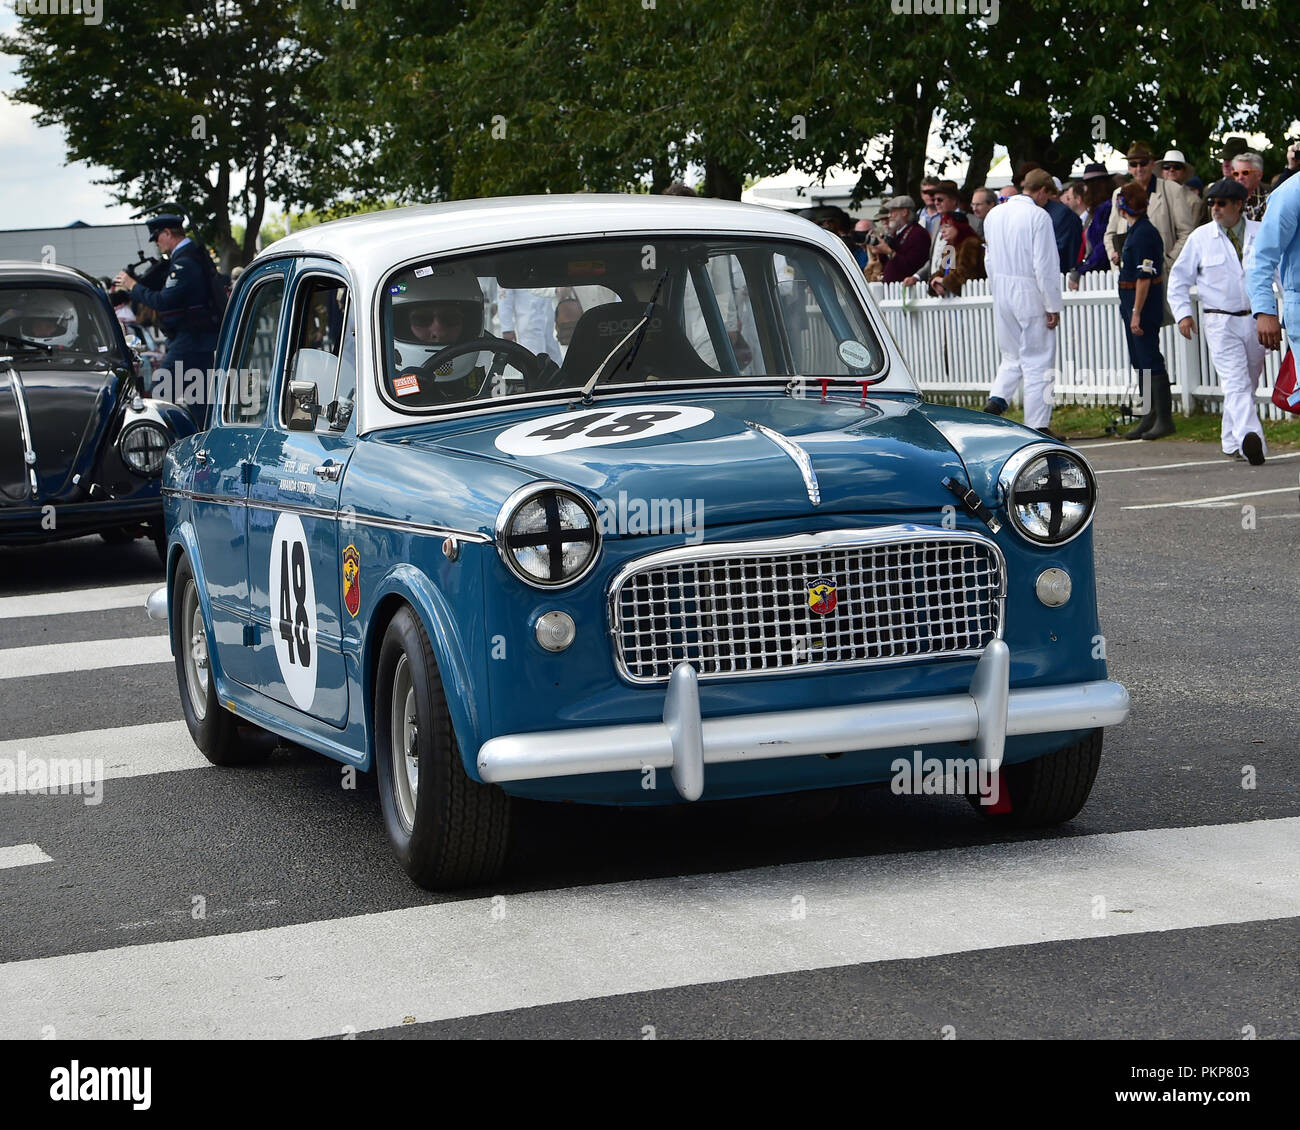 Peter James, FIAT Abarth Evocation, Jack Sears Memorial Trophy, saloon cars, British Saloon Car Championship, 1958, Goodwood Revival 2018, September 2 Stock Photo